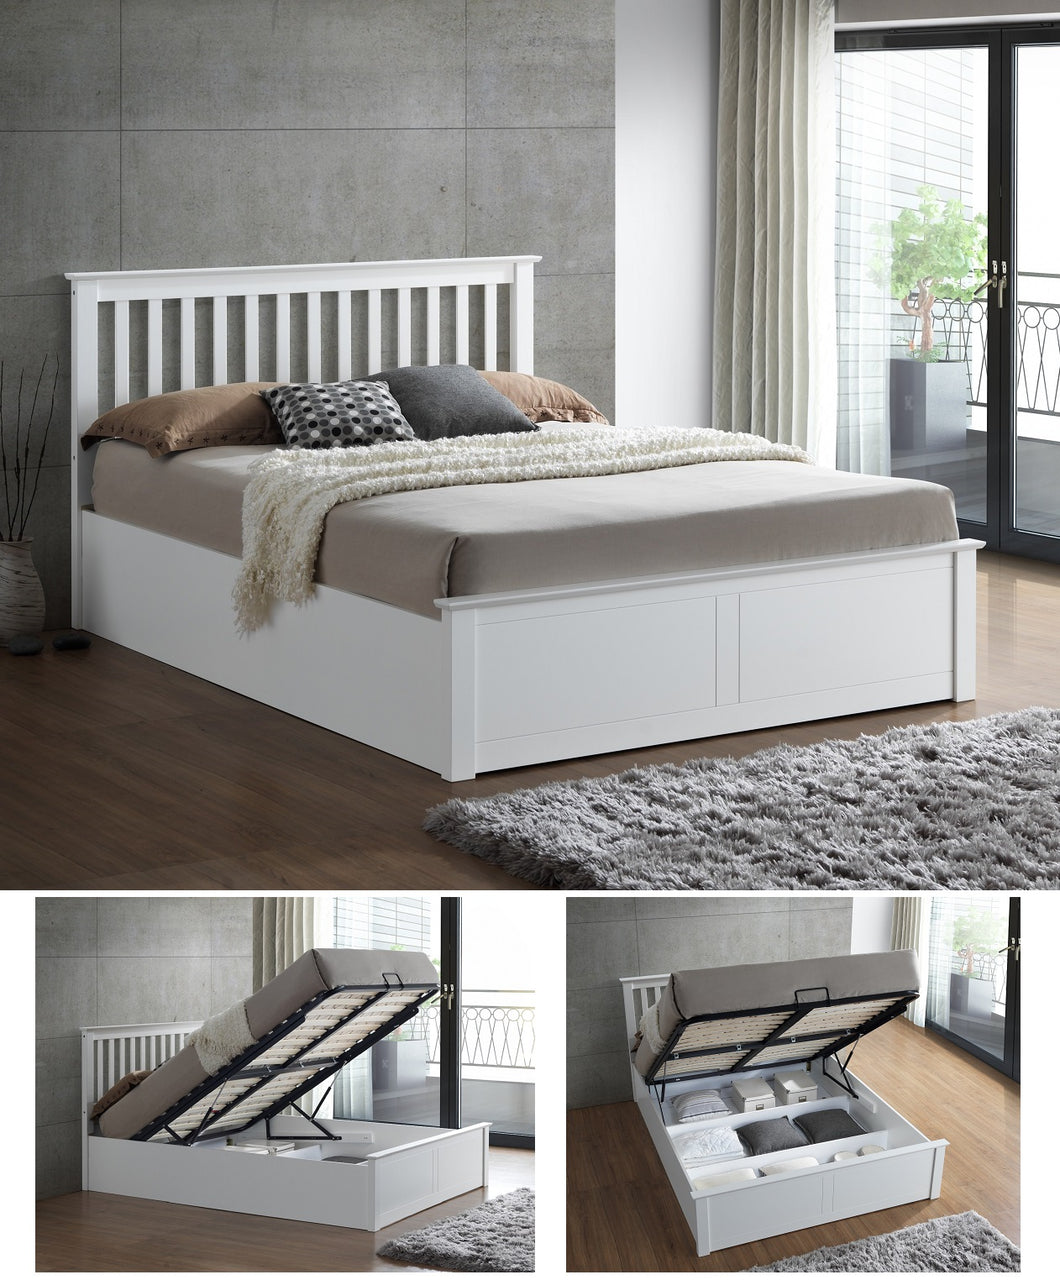 Flora Ottoman Double Bed<br>£12 Per Week For 52 Weeks